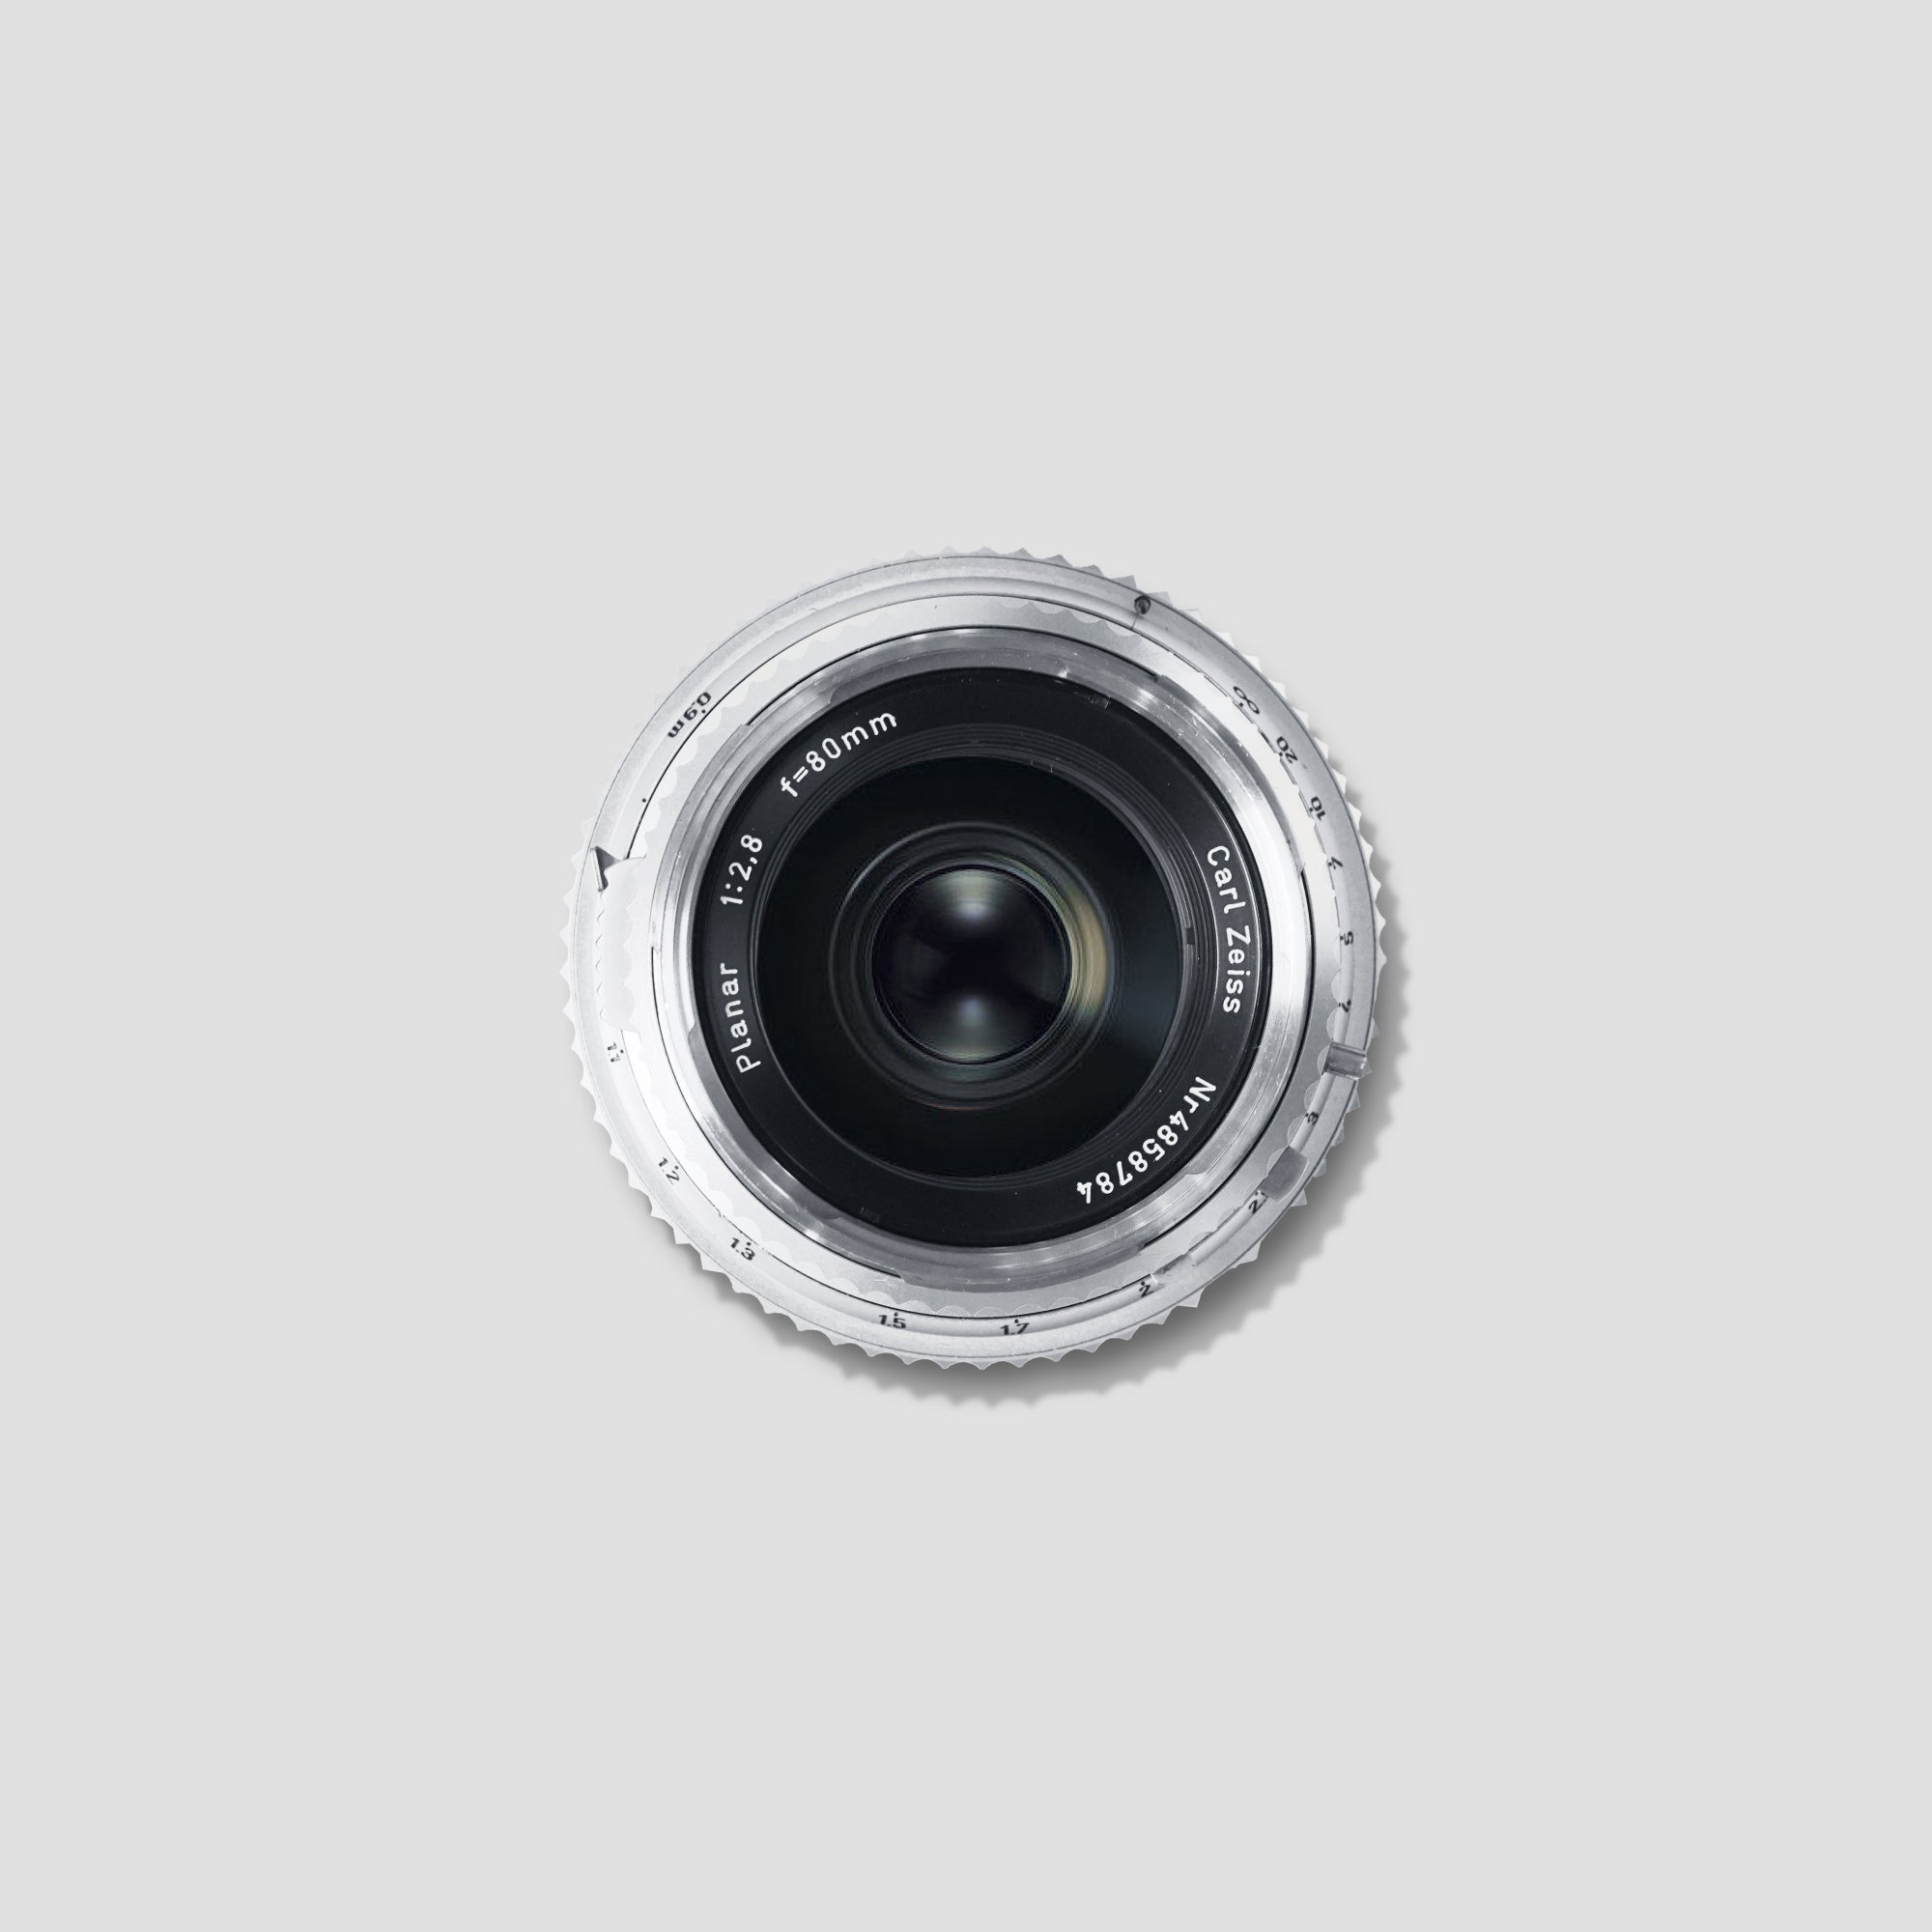 Buy Planar 80mm 1:2.8 C now at Analogue Amsterdam